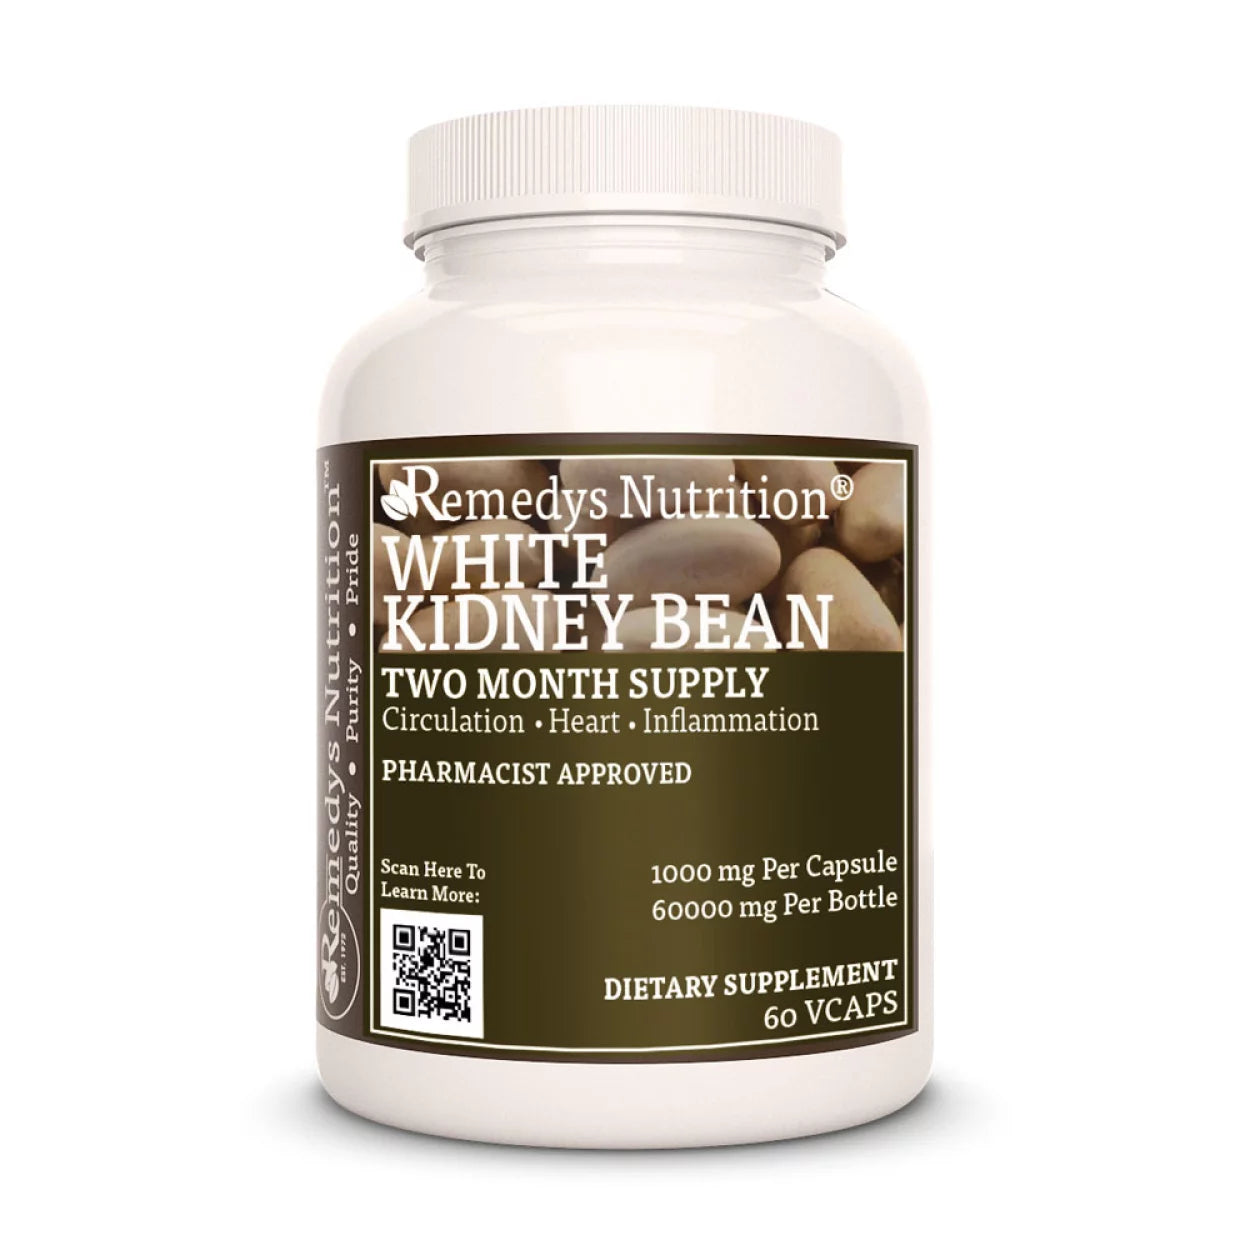 Image of Remedy's Nutrition® White Kidney Bean Capsules Herbal Dietary Supplement front bottle Made in USA Phaseolus vulgaris